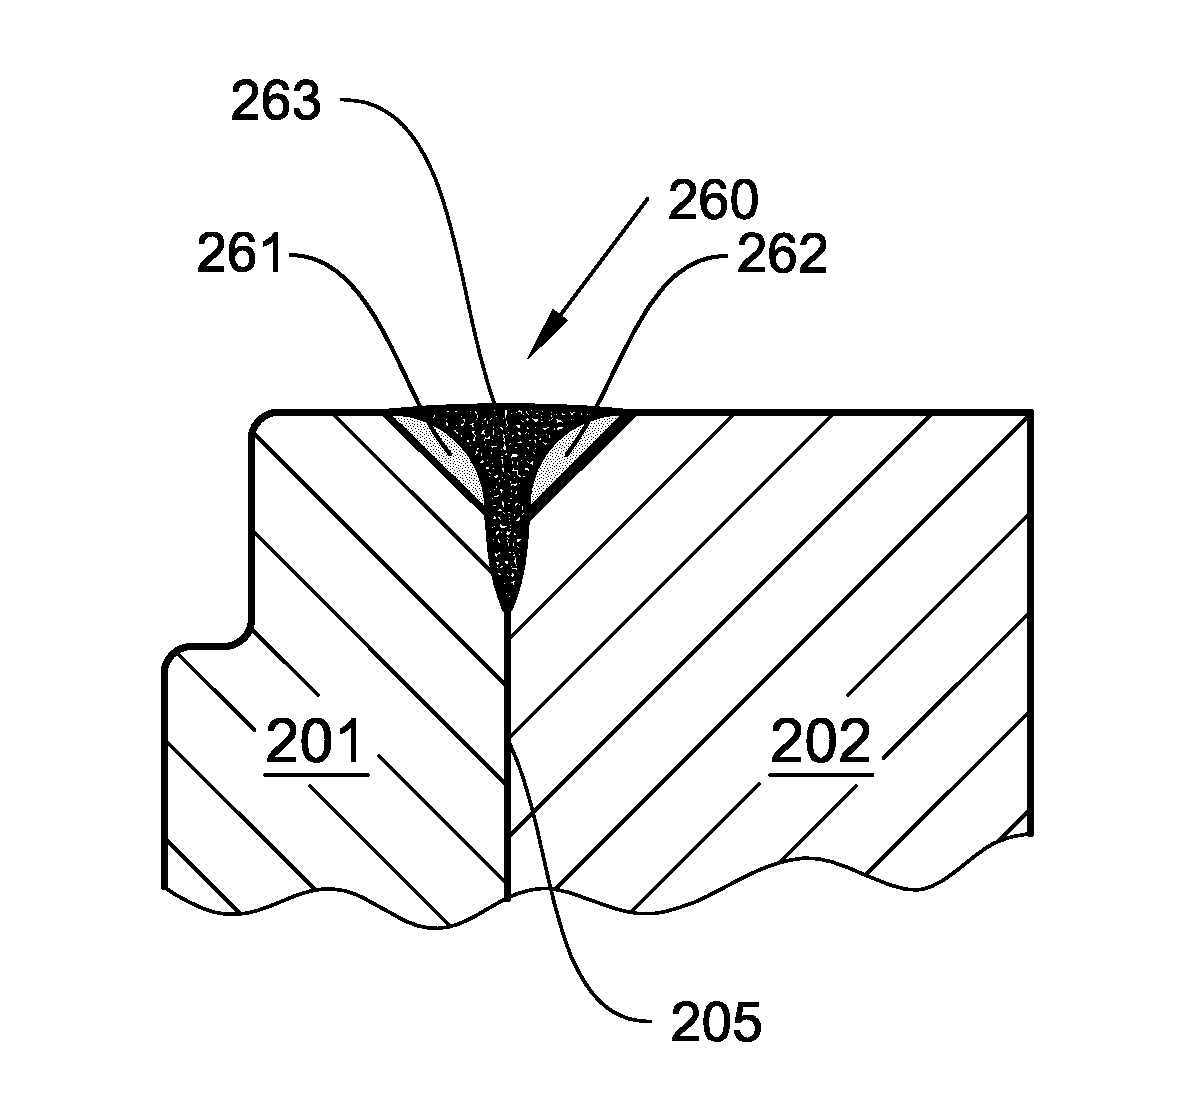 Assembly with weld joint formed in hybrid welding process